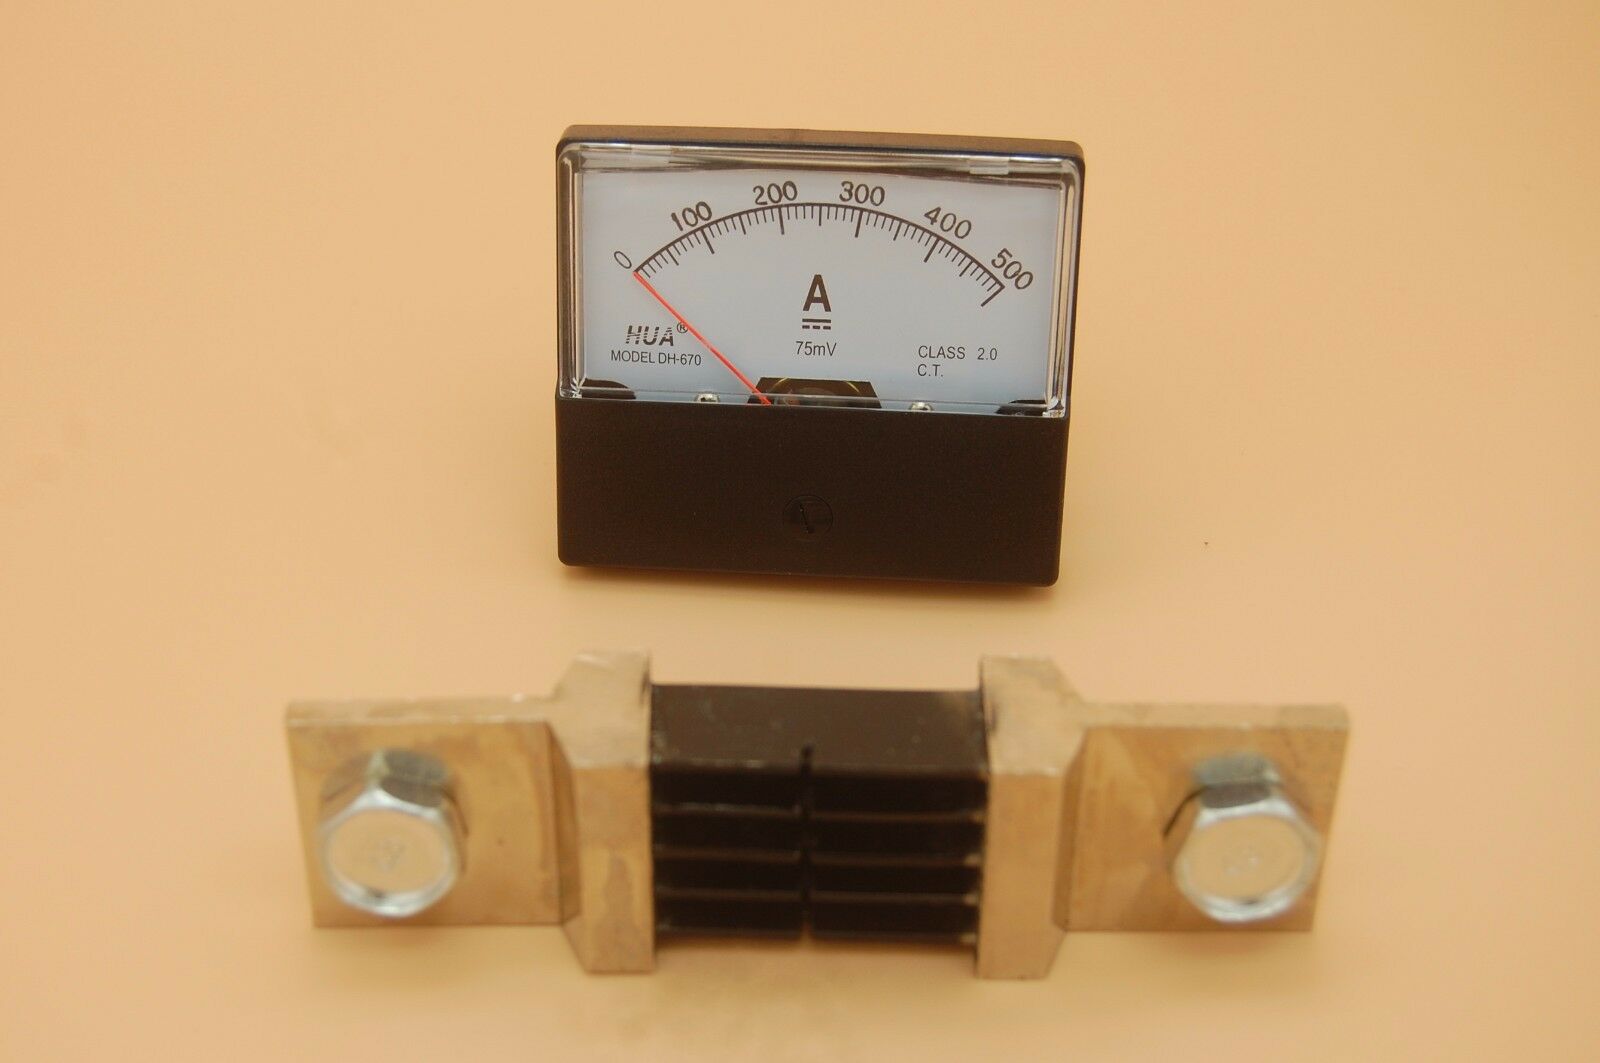 1PC DC 0-500A Analog Ammeter Panel AMP Current Meter 60*70MM with 75mV Shunt